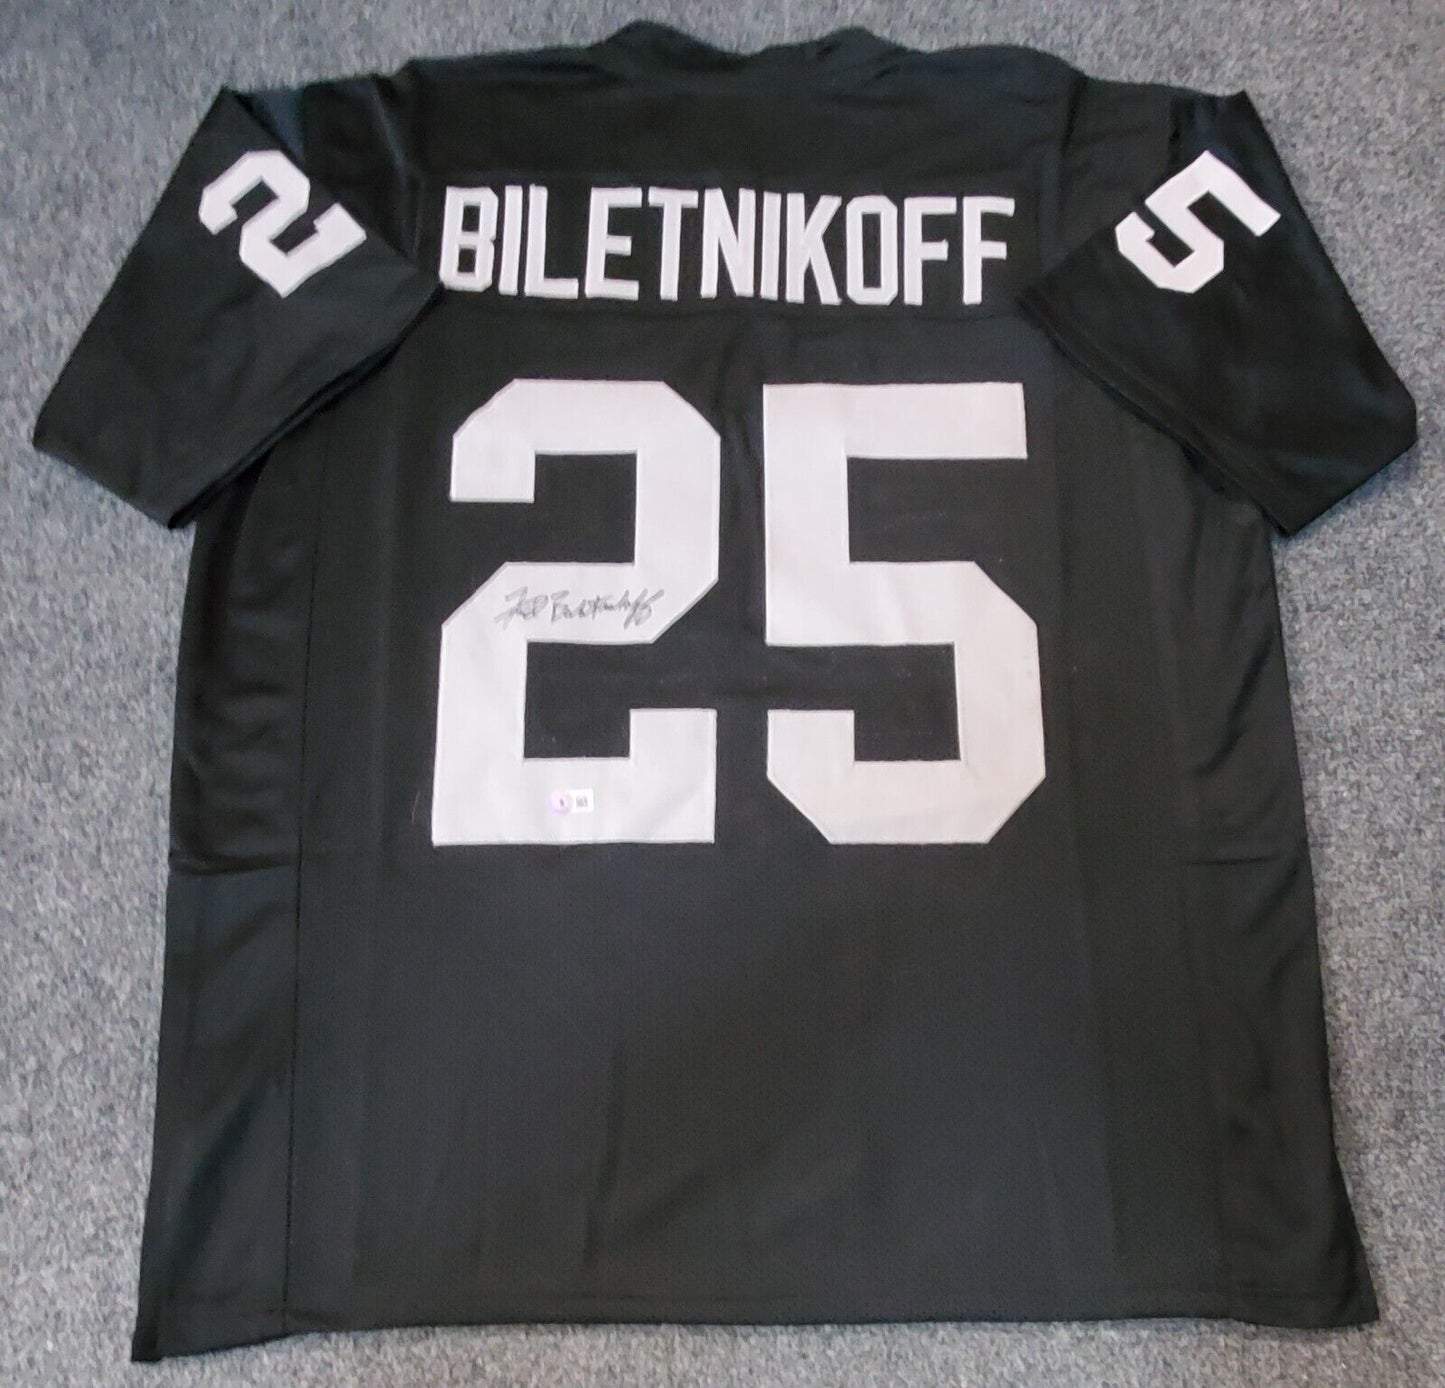 MVP Authentics Oakland Raiders Fred Biletnikoff Autographed Signed Jersey Beckett Holo 112.50 sports jersey framing , jersey framing